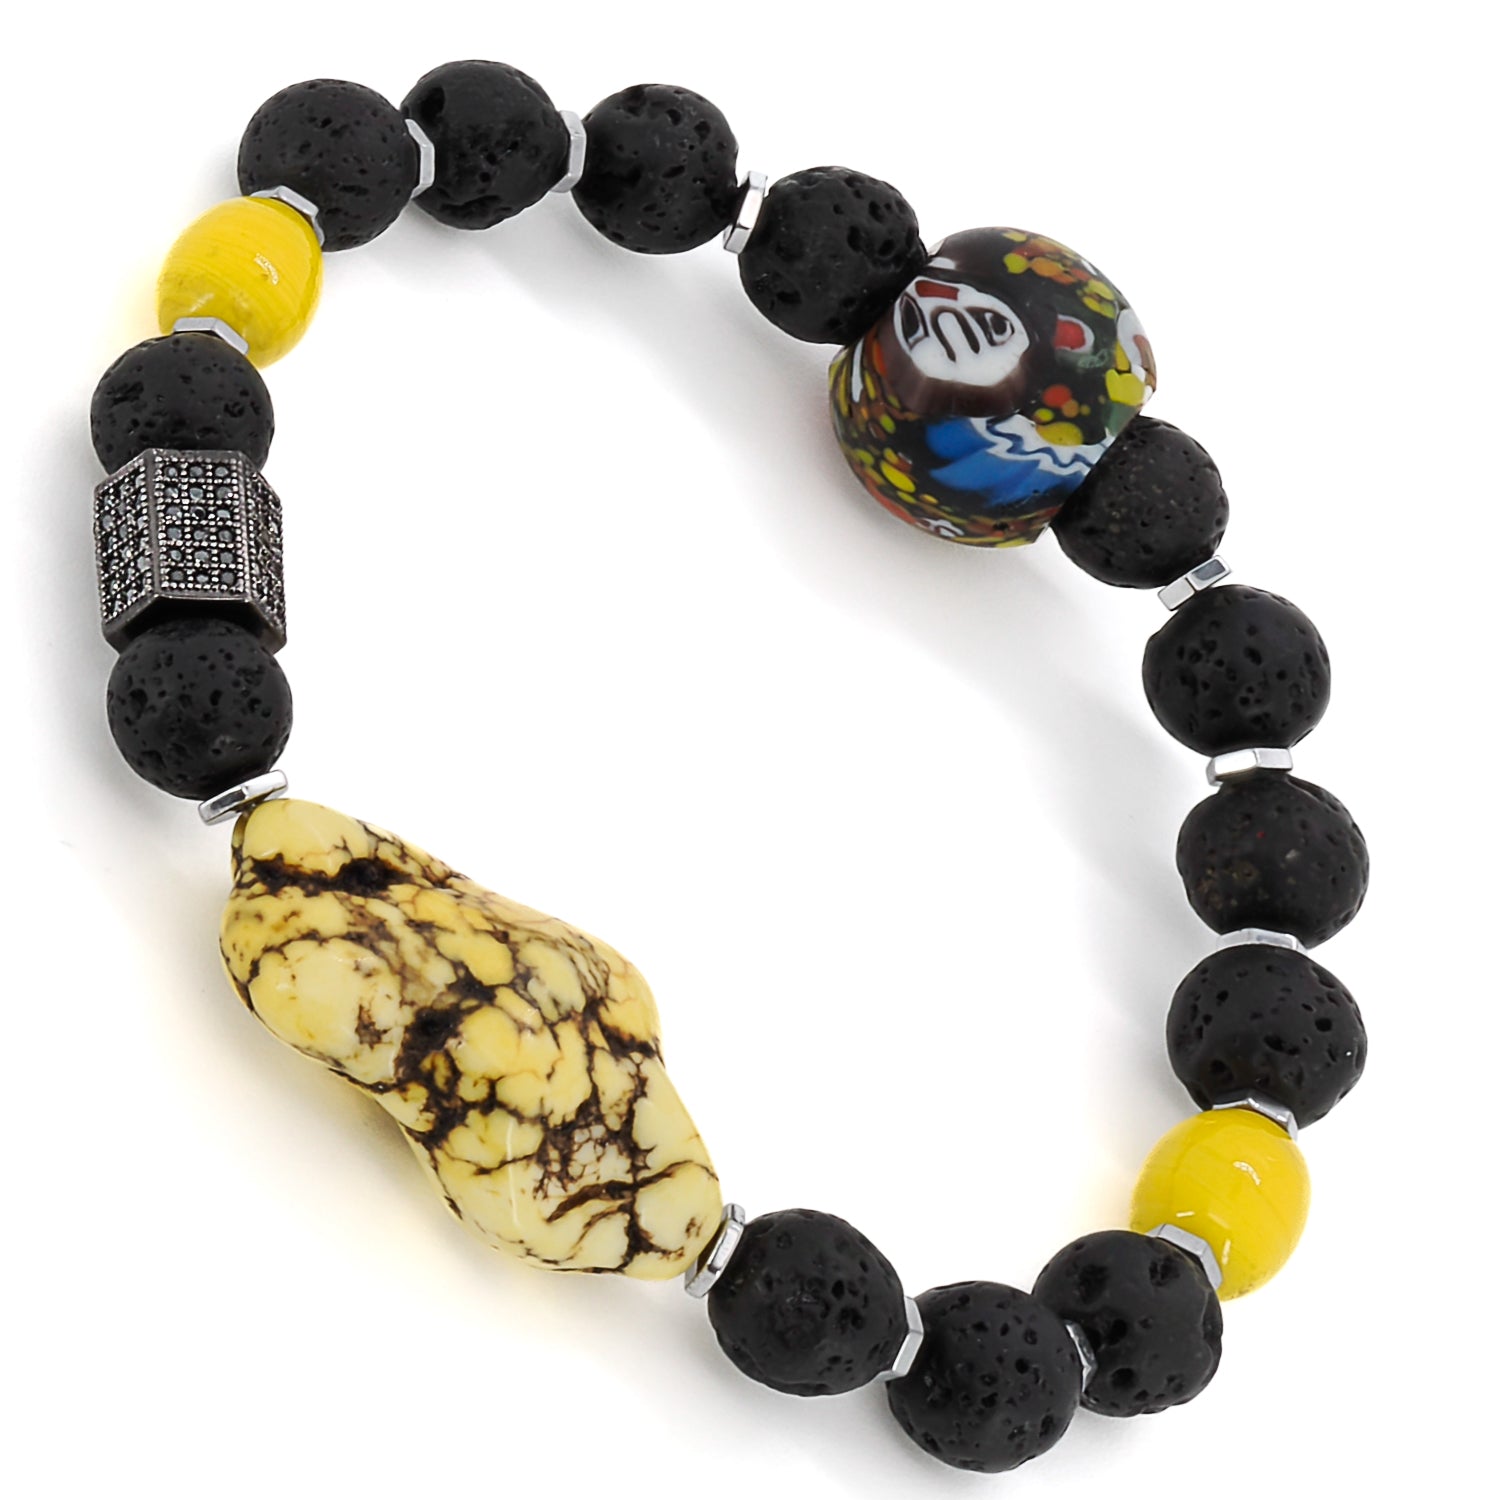 Vibrant yellow African beads on the African Yellow Turquoise Bracelet, adding a pop of color and celebrating the spirit of African culture.